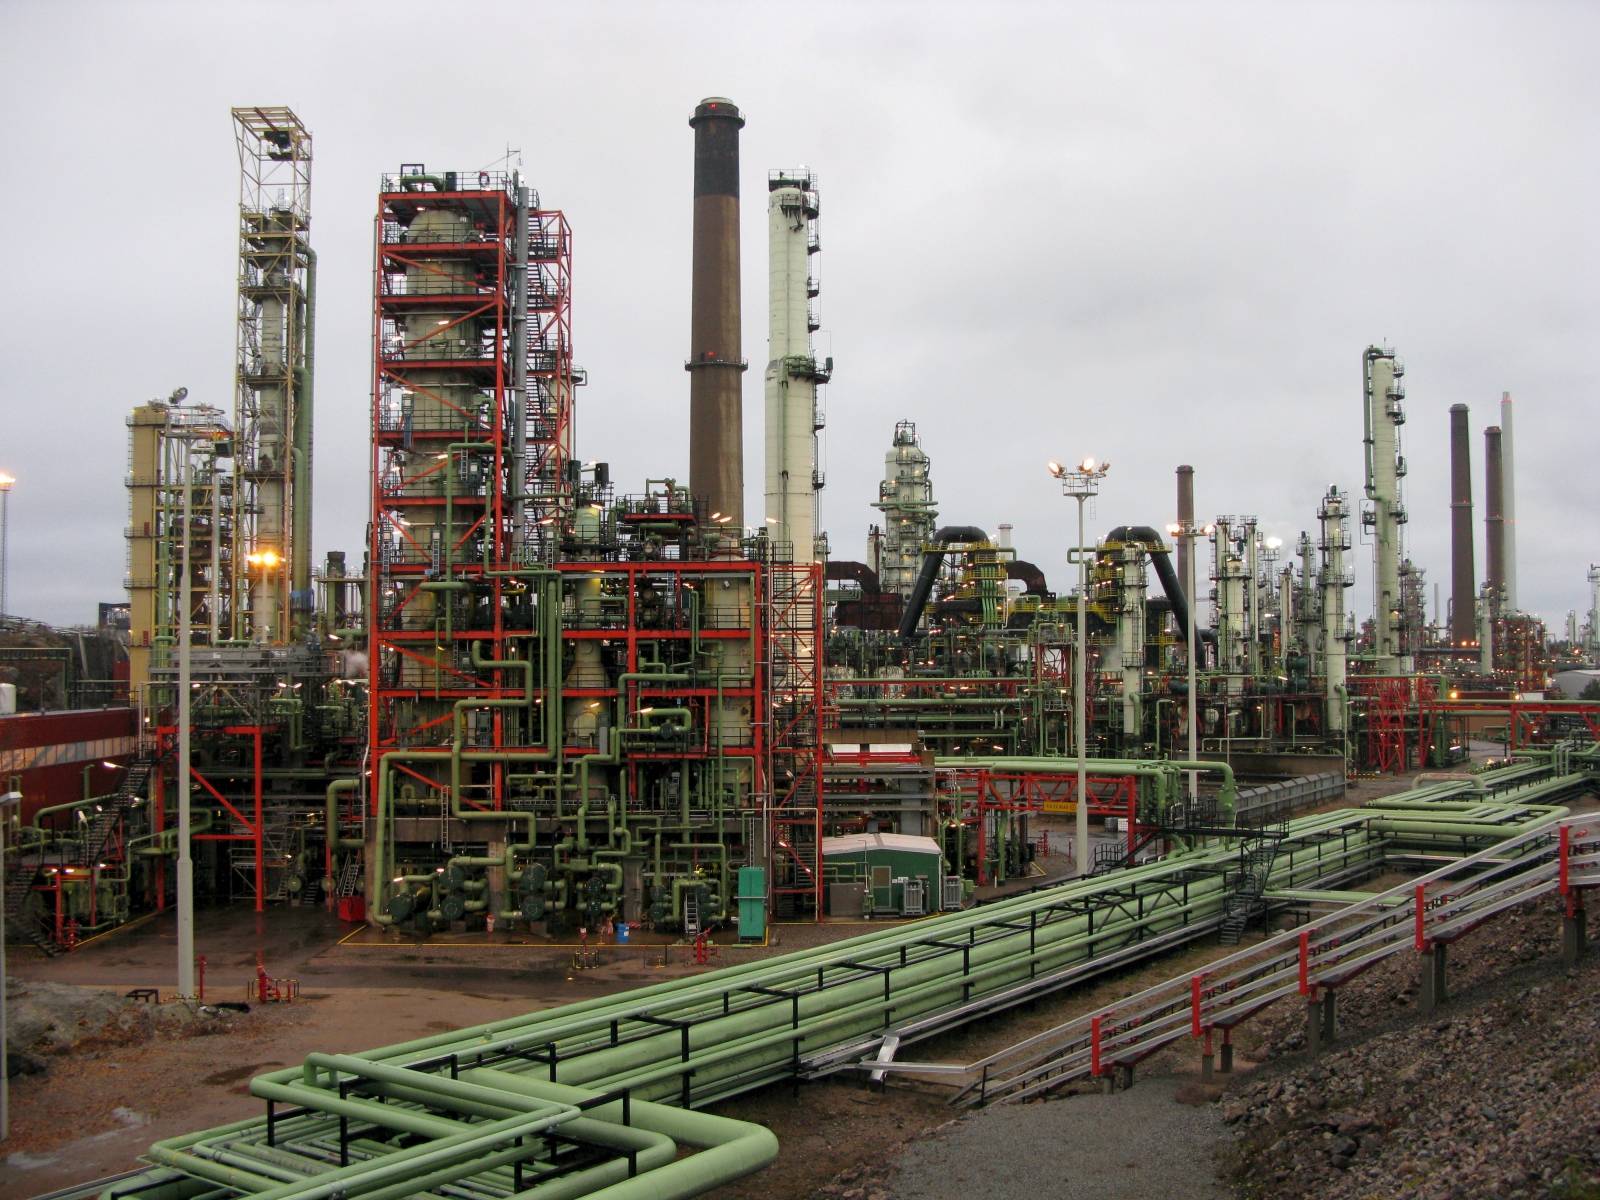 FILE PHOTO: General view of Neste's oil refinery, with a total refining capacity of about 13.5 million tonnes per year, in Porvoo